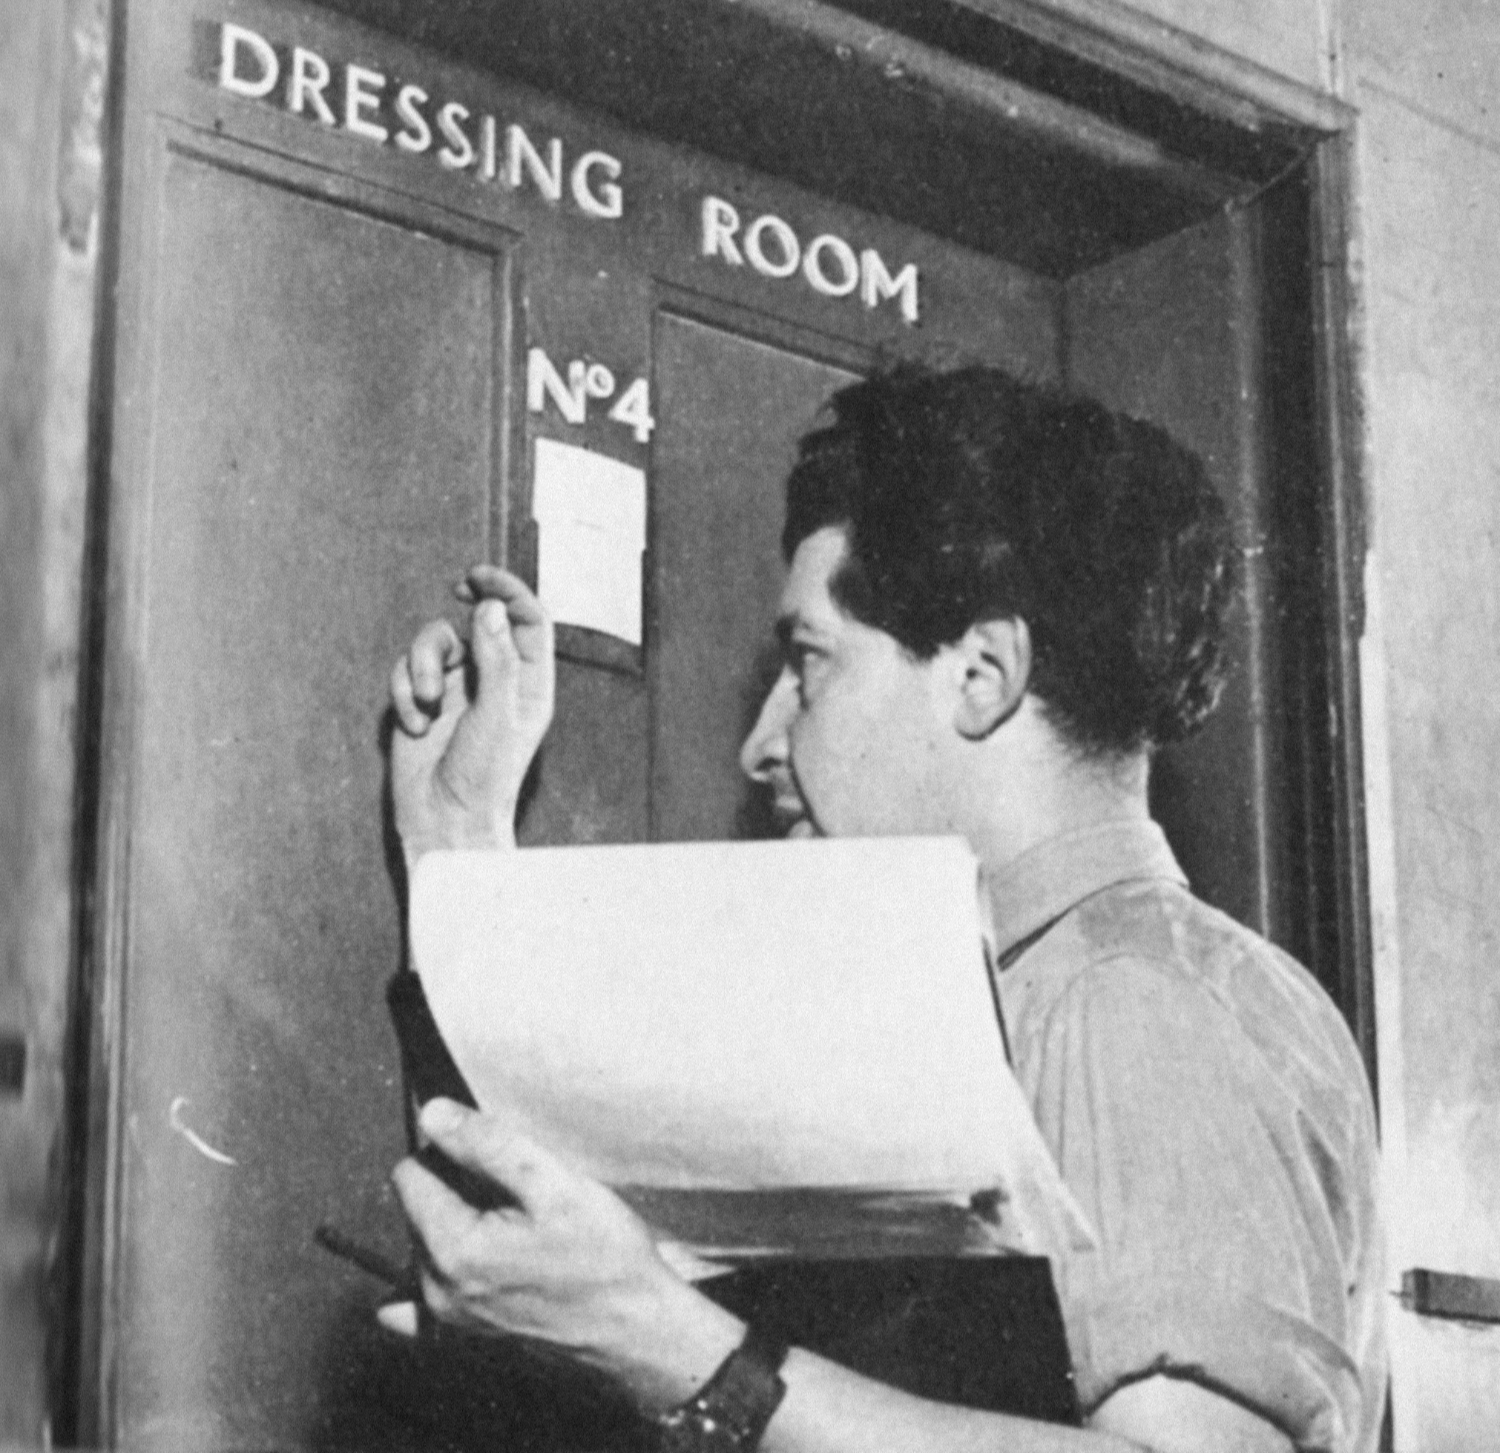 A man knocking on a dressing room door